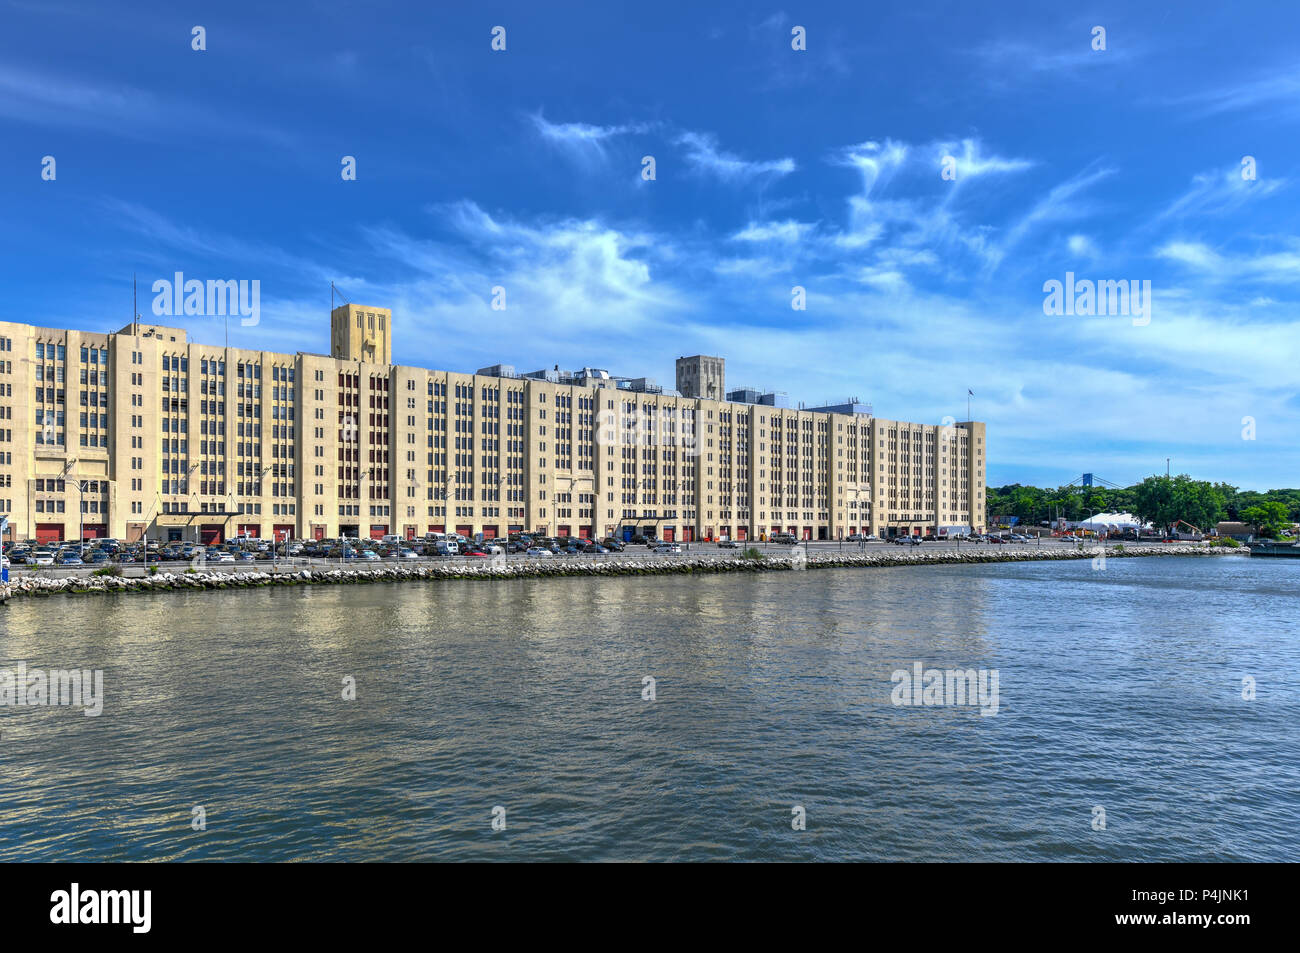 Brooklyn, New York - June 11, 2018: Brooklyn Army Terminal designed by Cass Gilbert and completed in September 1919. It was the largest military suppl Stock Photo